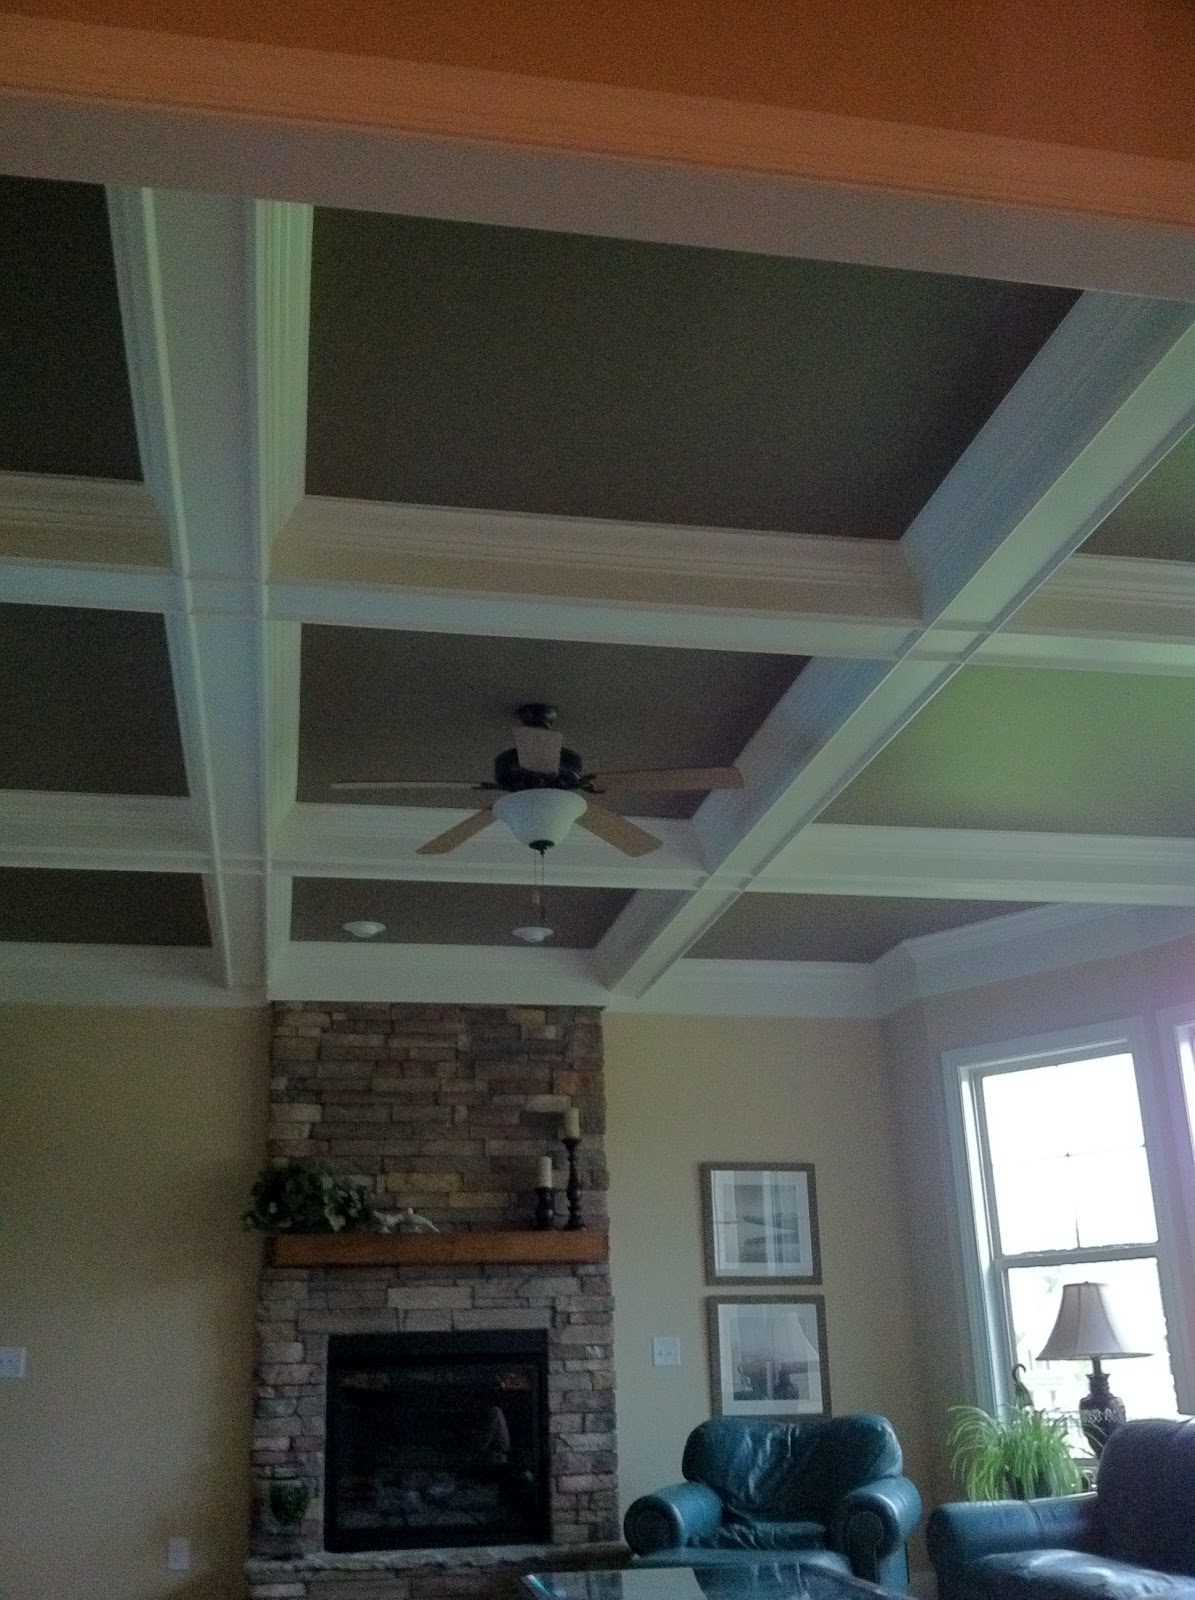 Carol Beck Interiors: Coffered Ceilings...Design On The Ceiling